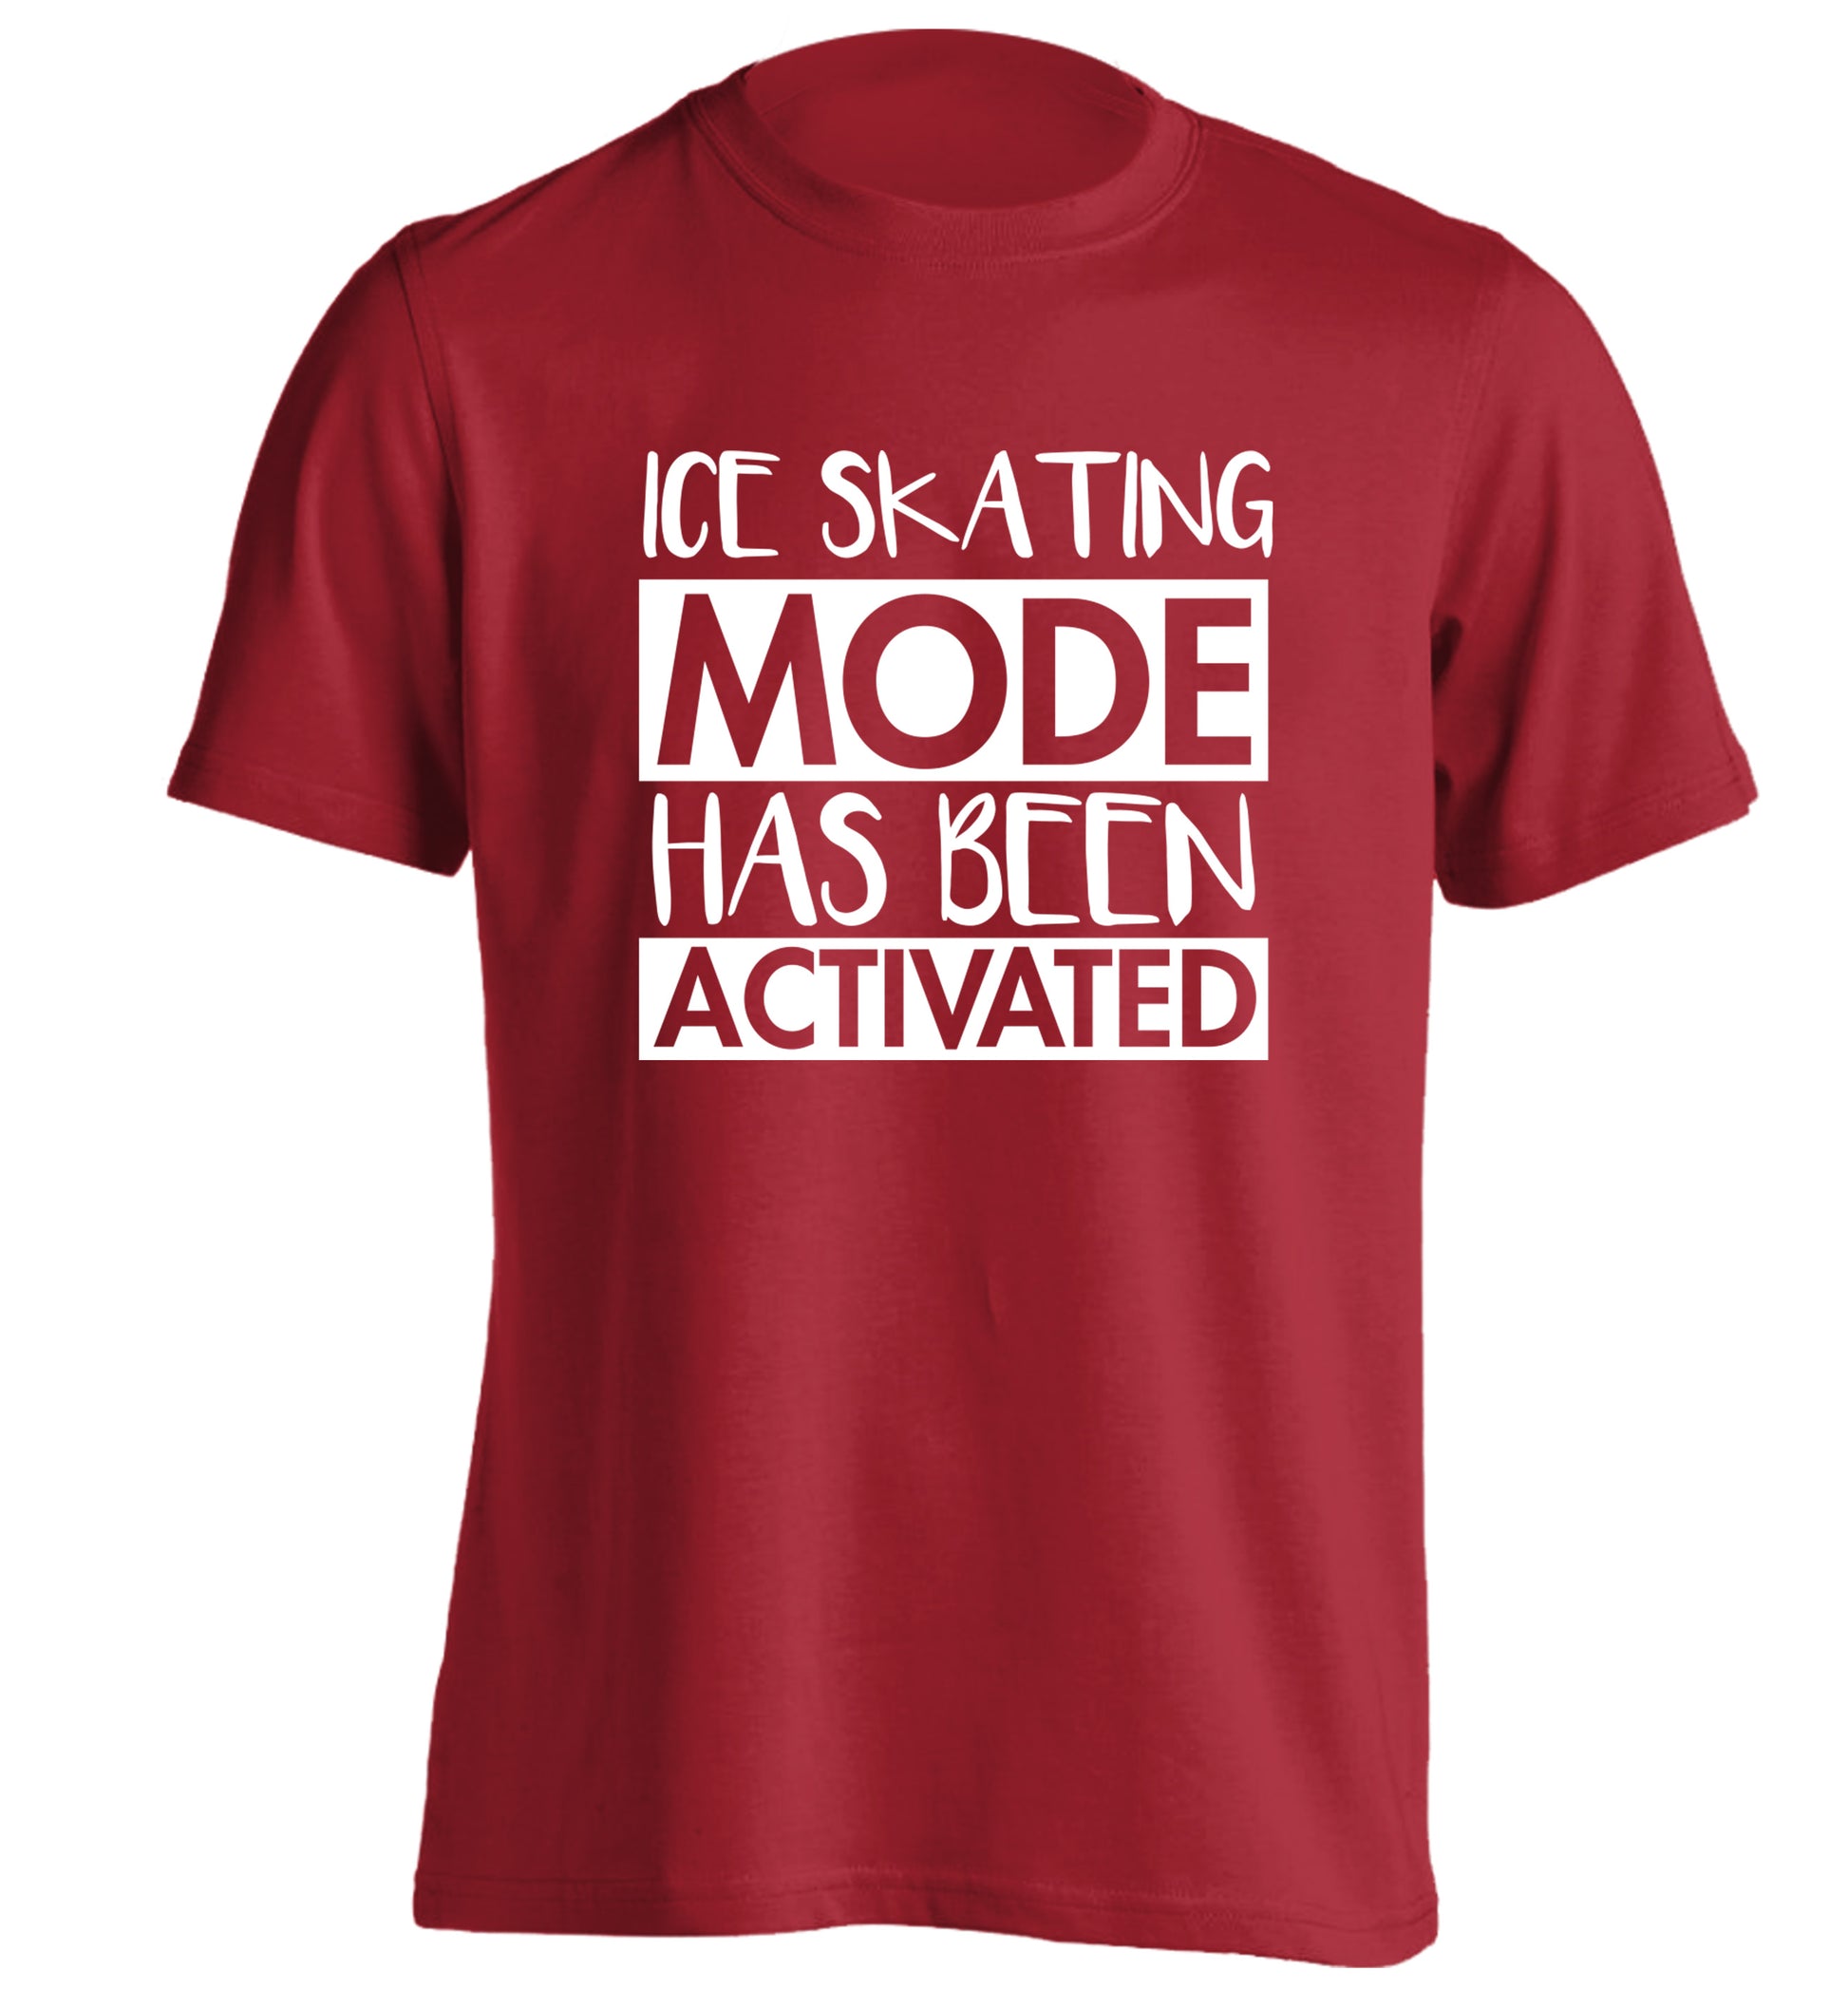 Ice skating mode activated adults unisexred Tshirt 2XL